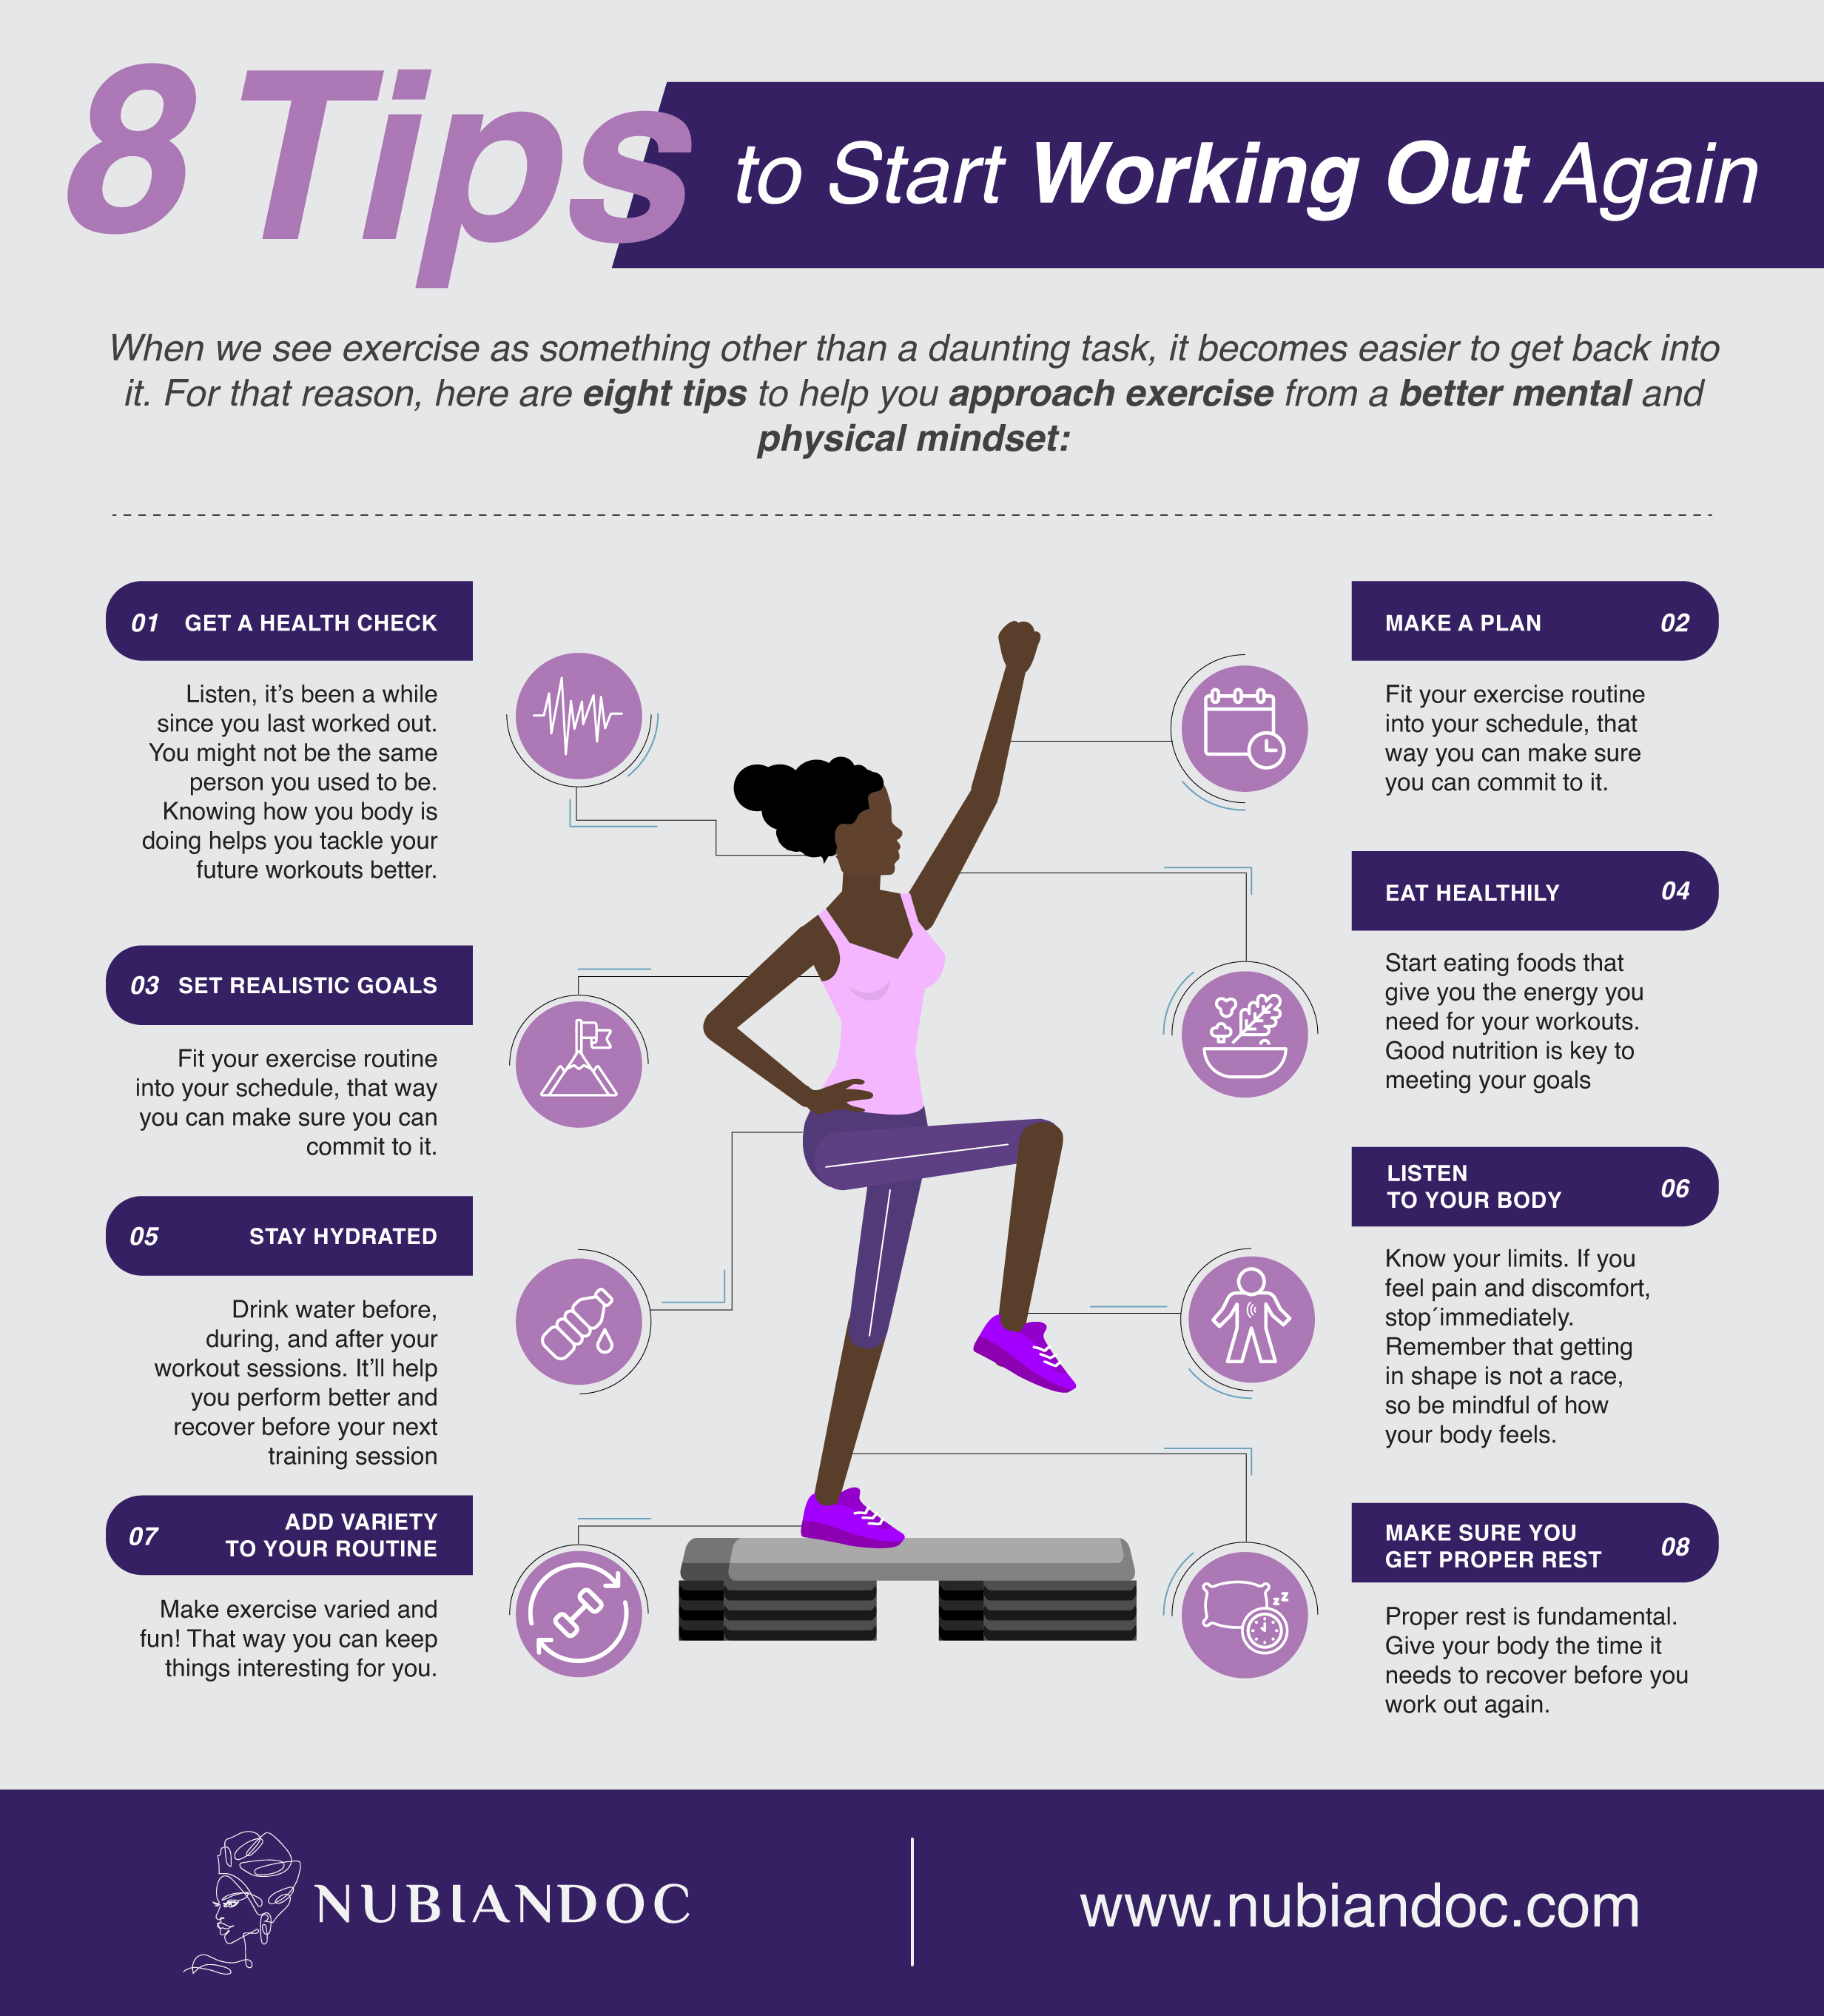 Infographic Showcasing 8 Tips to Start Working Out Again